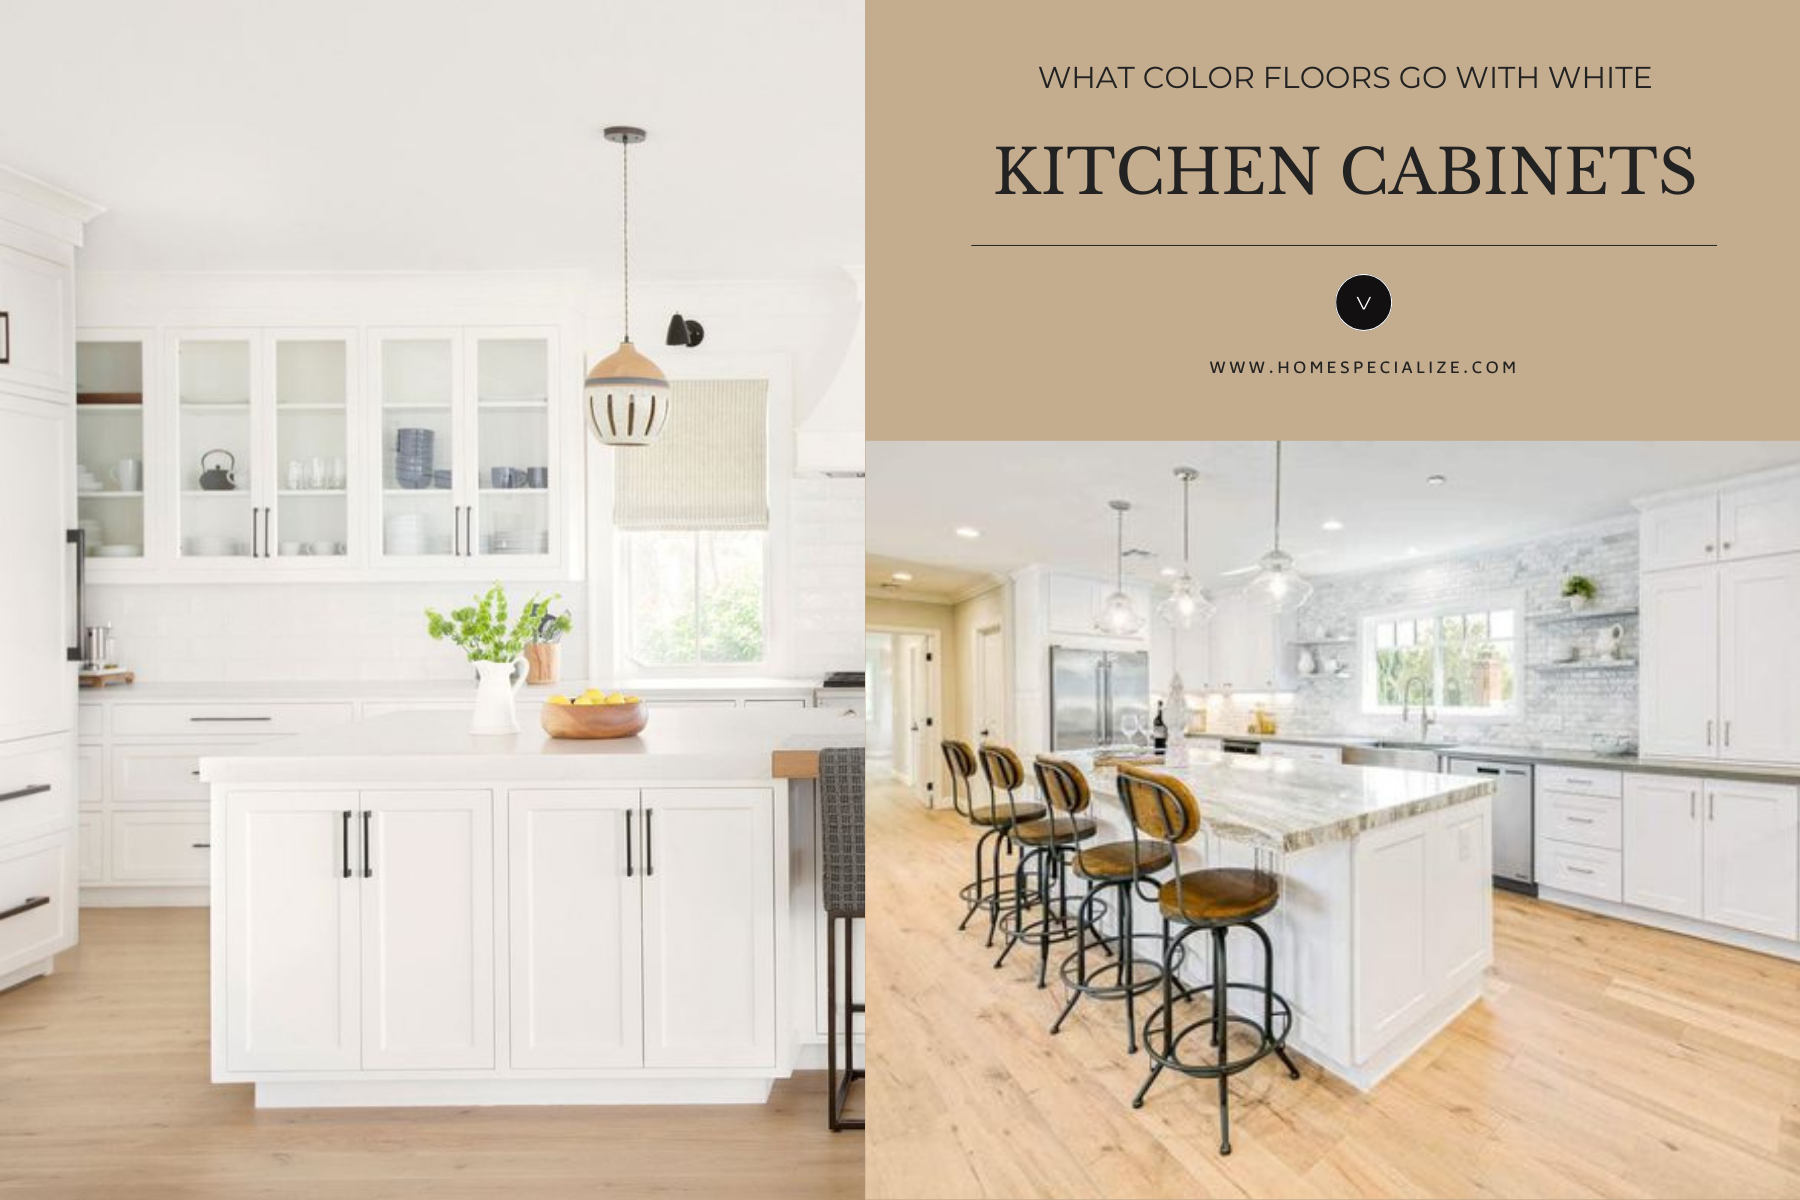 What Color Floors Go With White Kitchen Cabinets? Perfect Pairing!